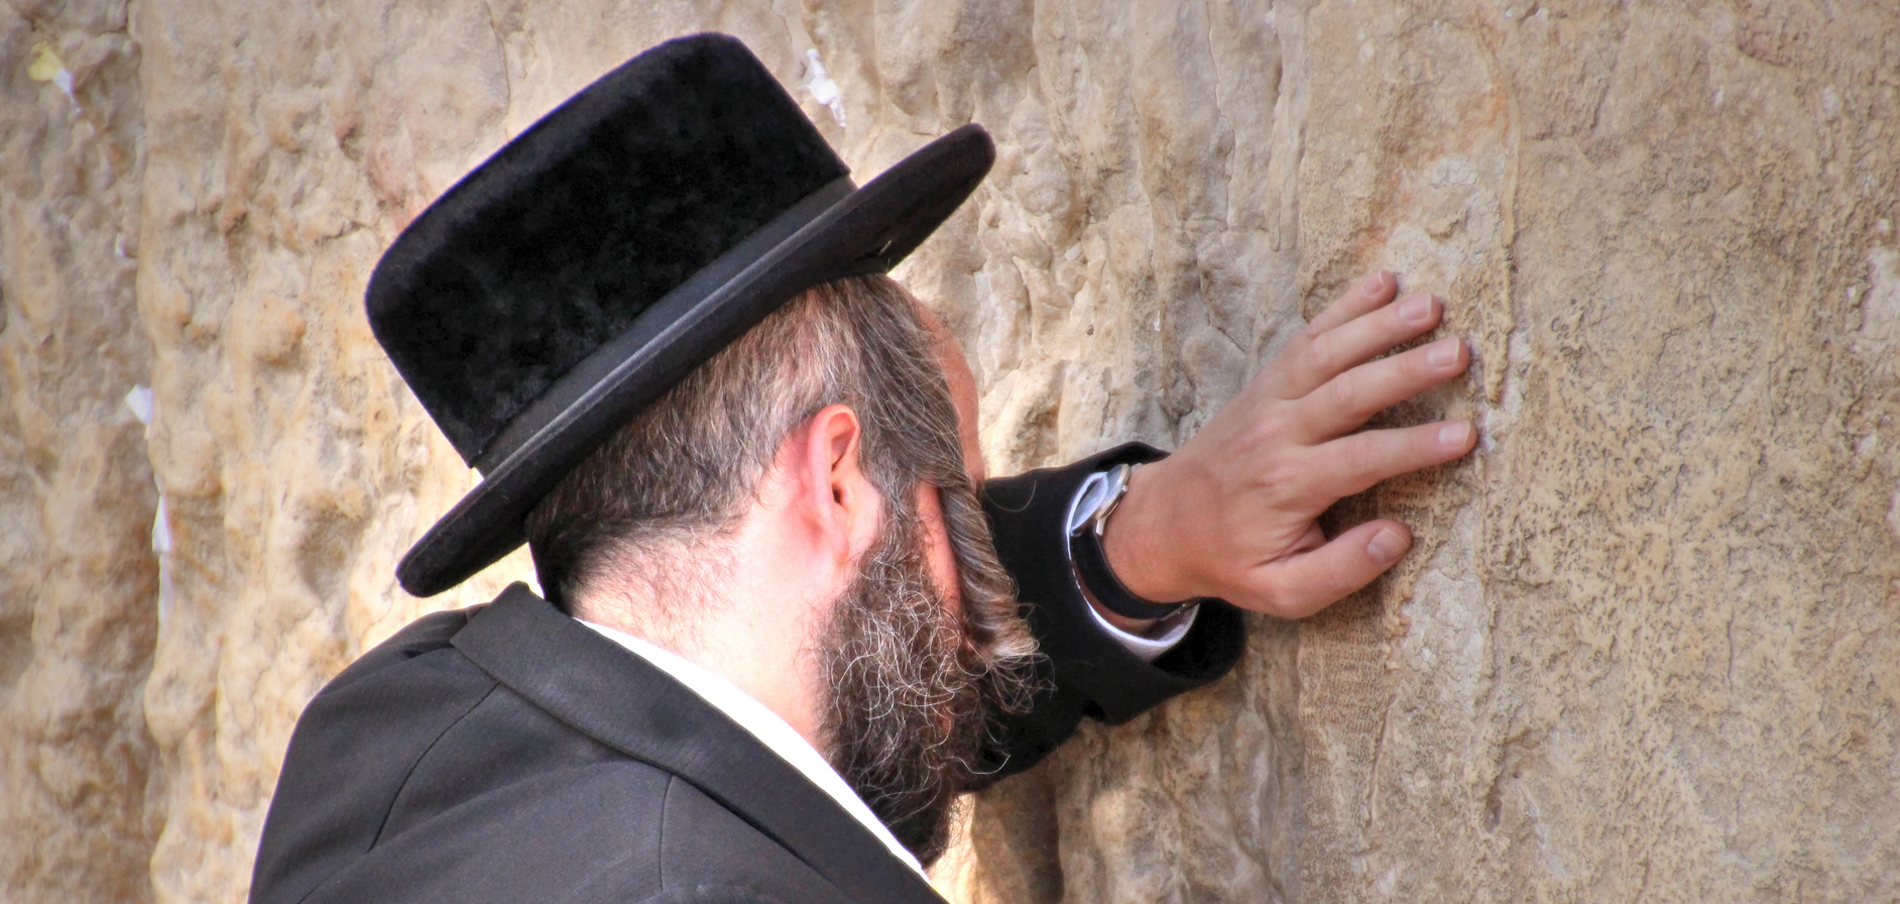 Peruvian hassidic Jew moves to Israel, gains large